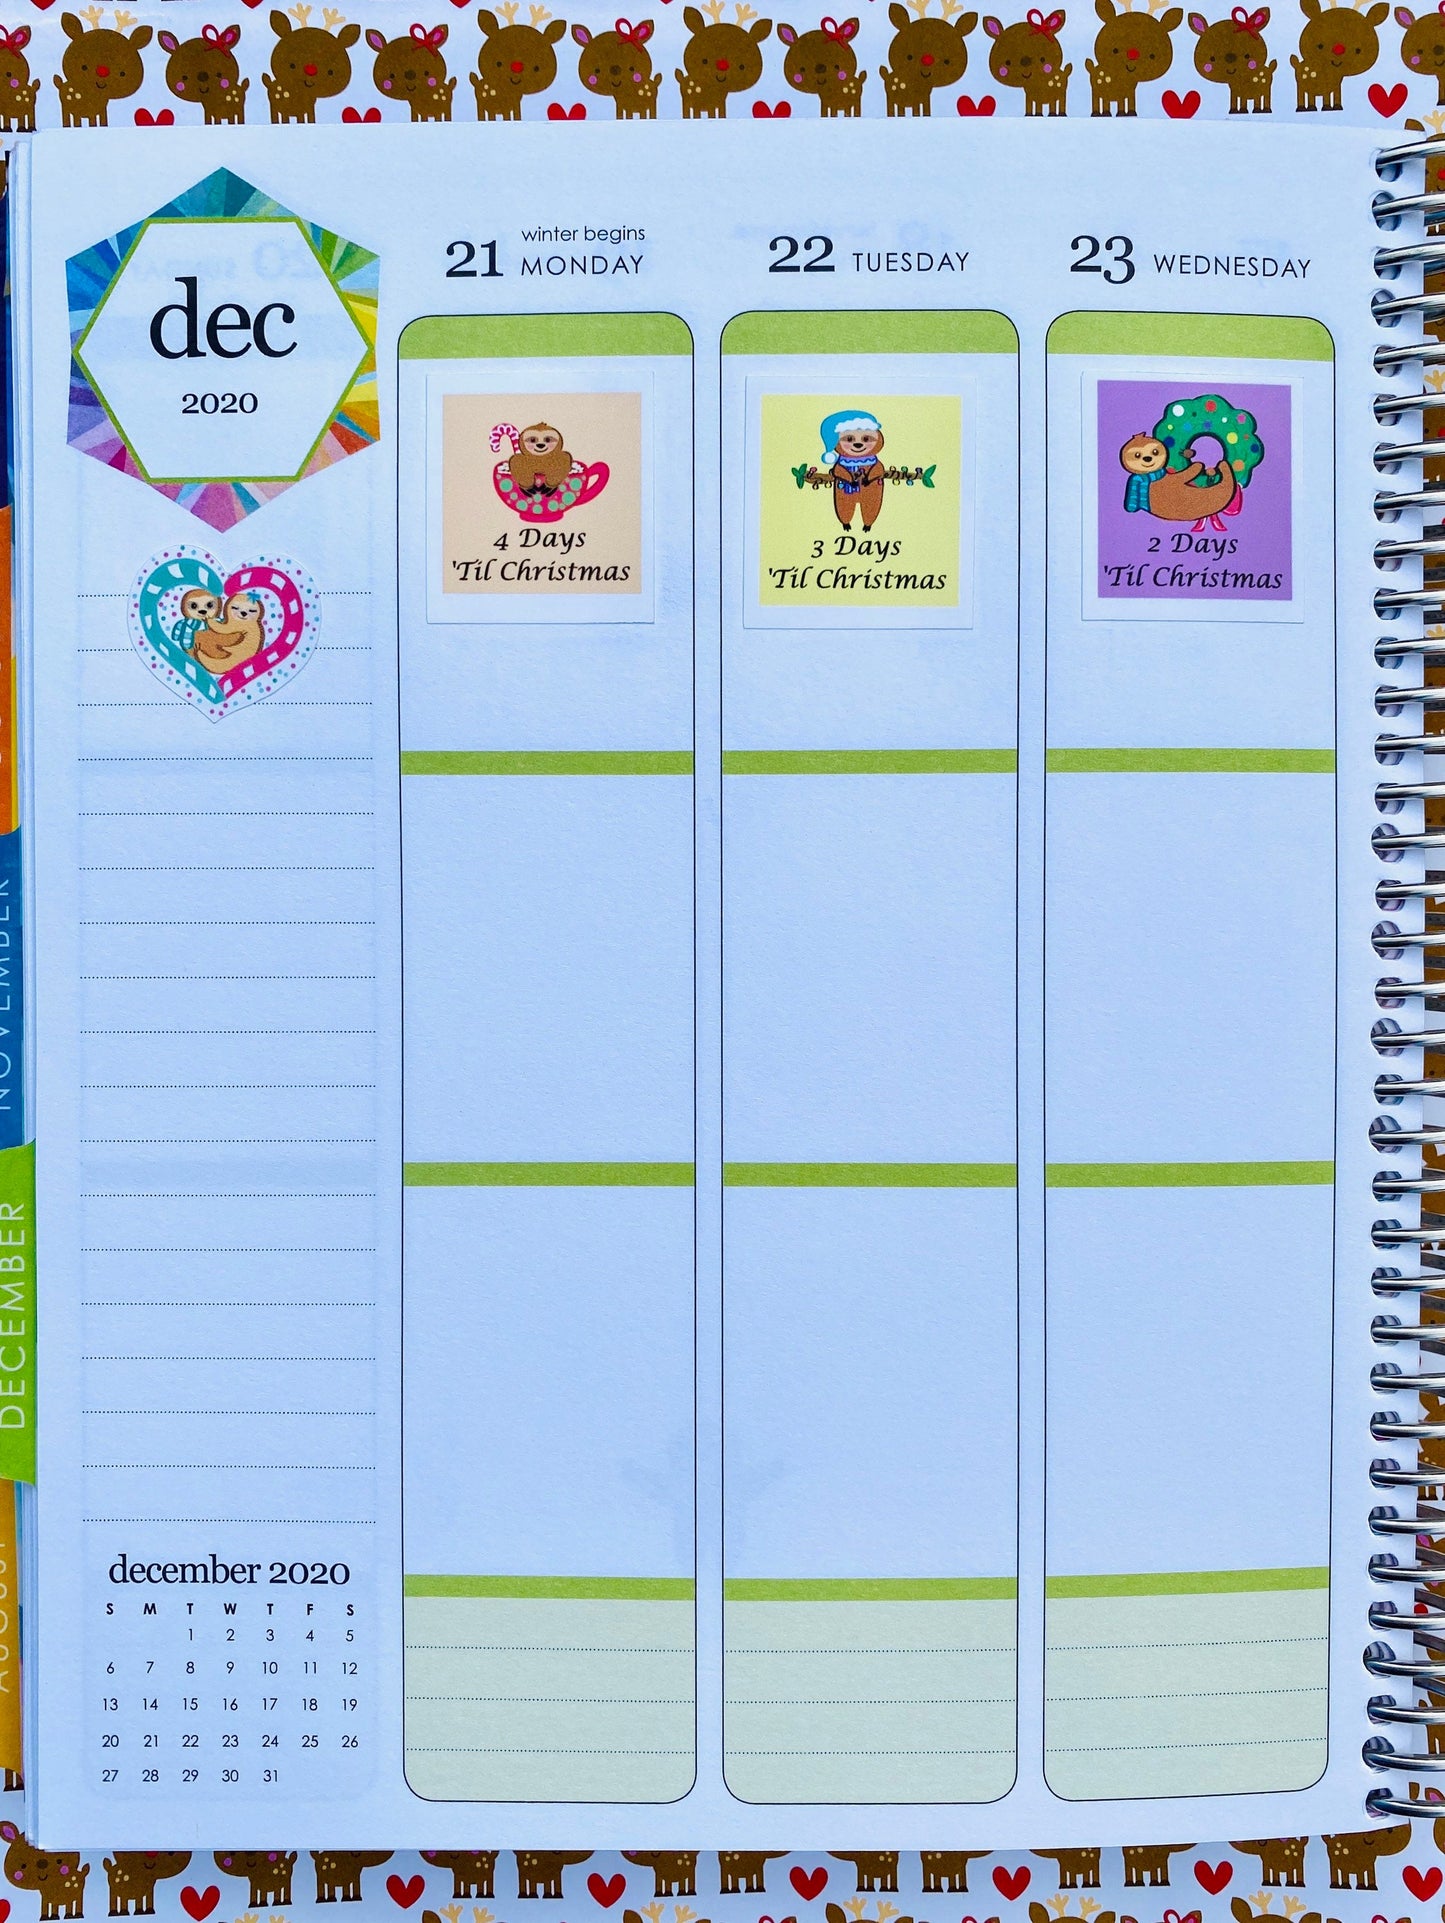 Days 4 - 2 of Sloth Countdown to Christmas stickers in a life planner.